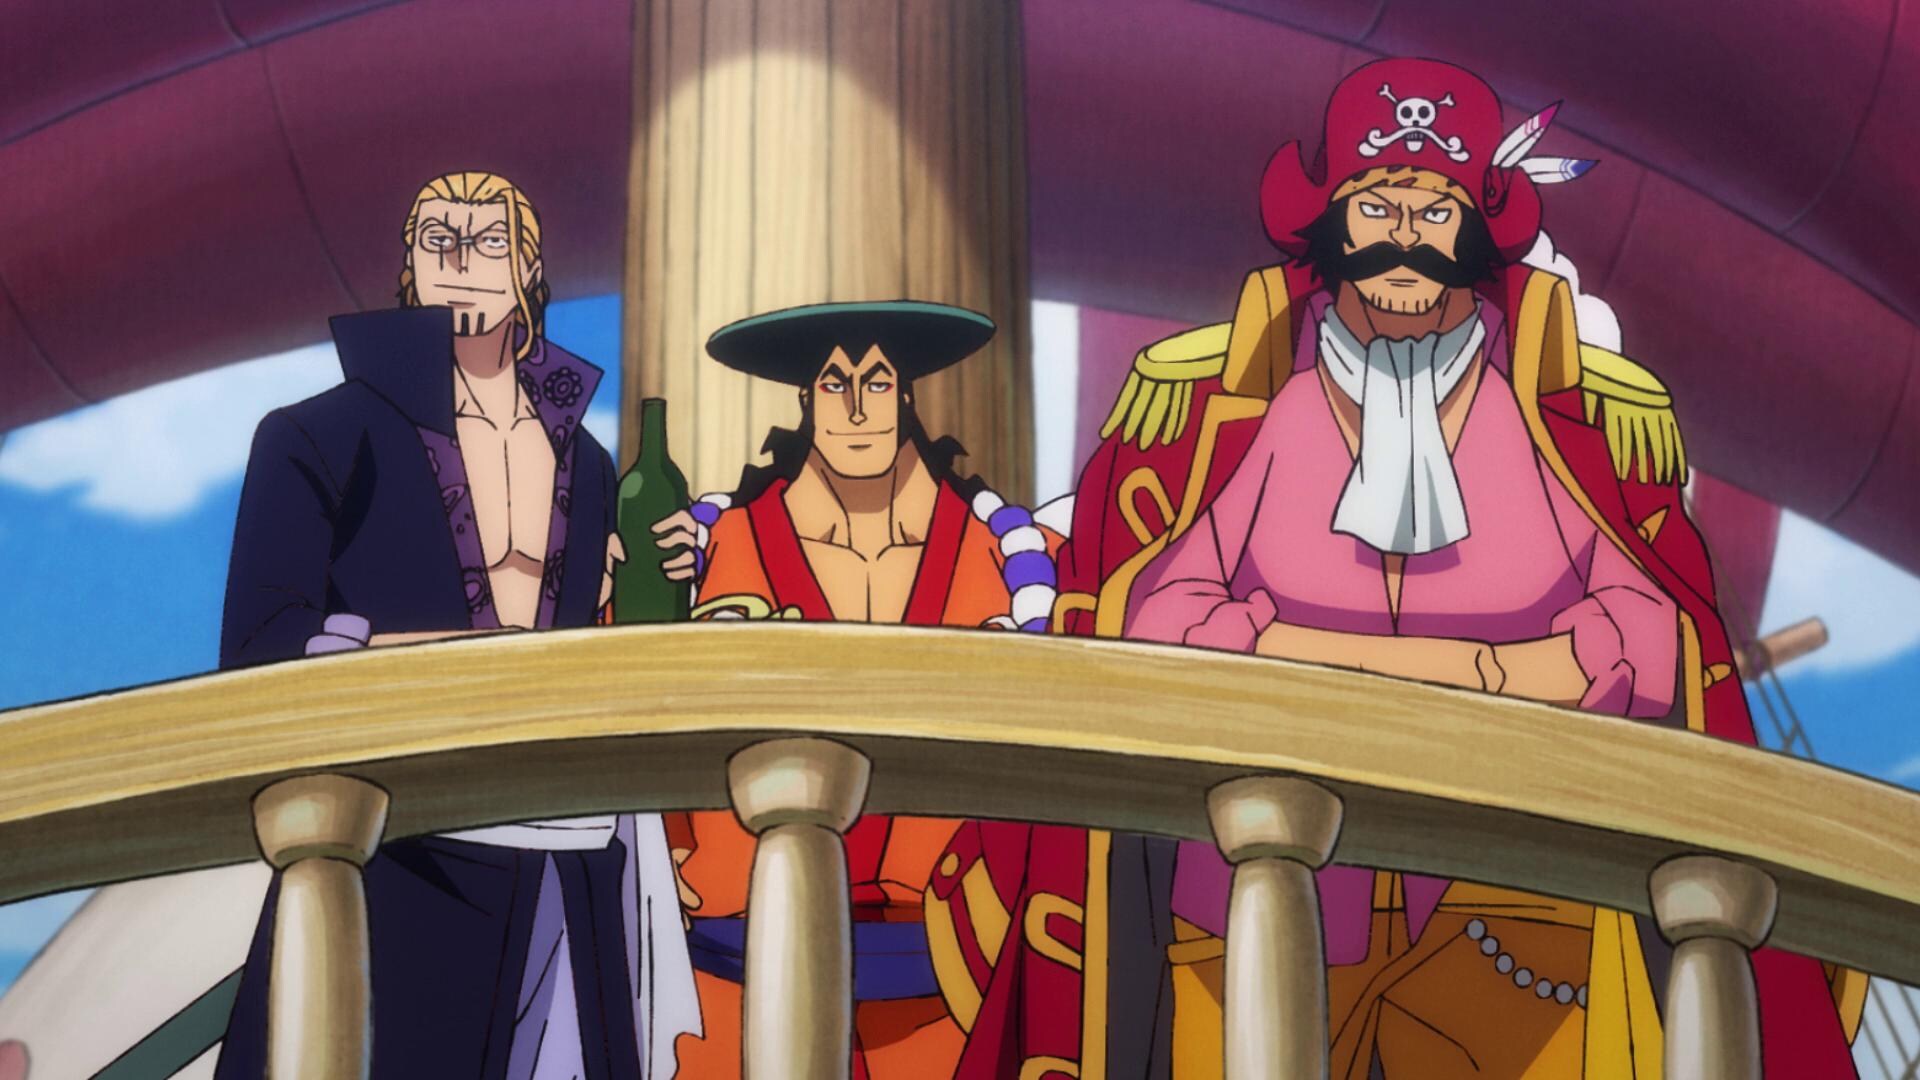 6 Most loved characters in One Piece; Here are the fan-favorites